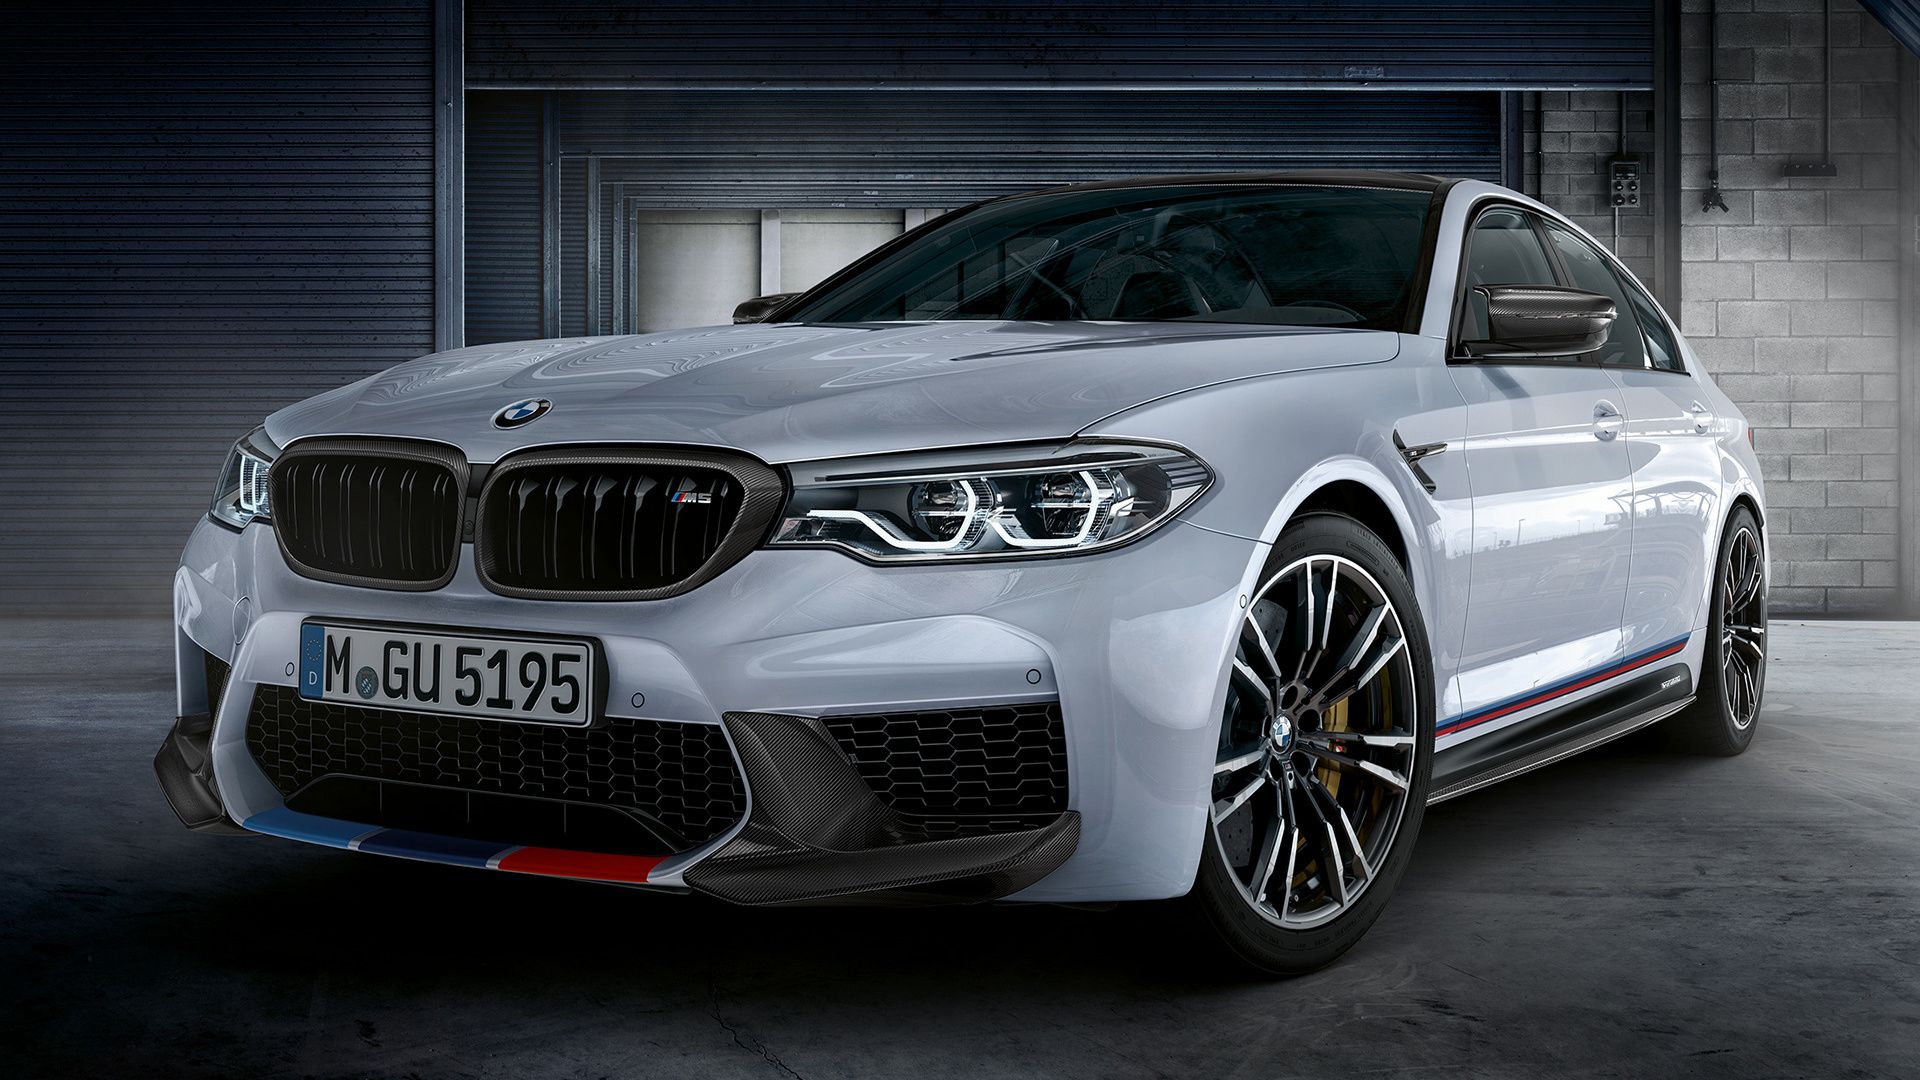 BMW M5 with M Performance Parts and HD Image